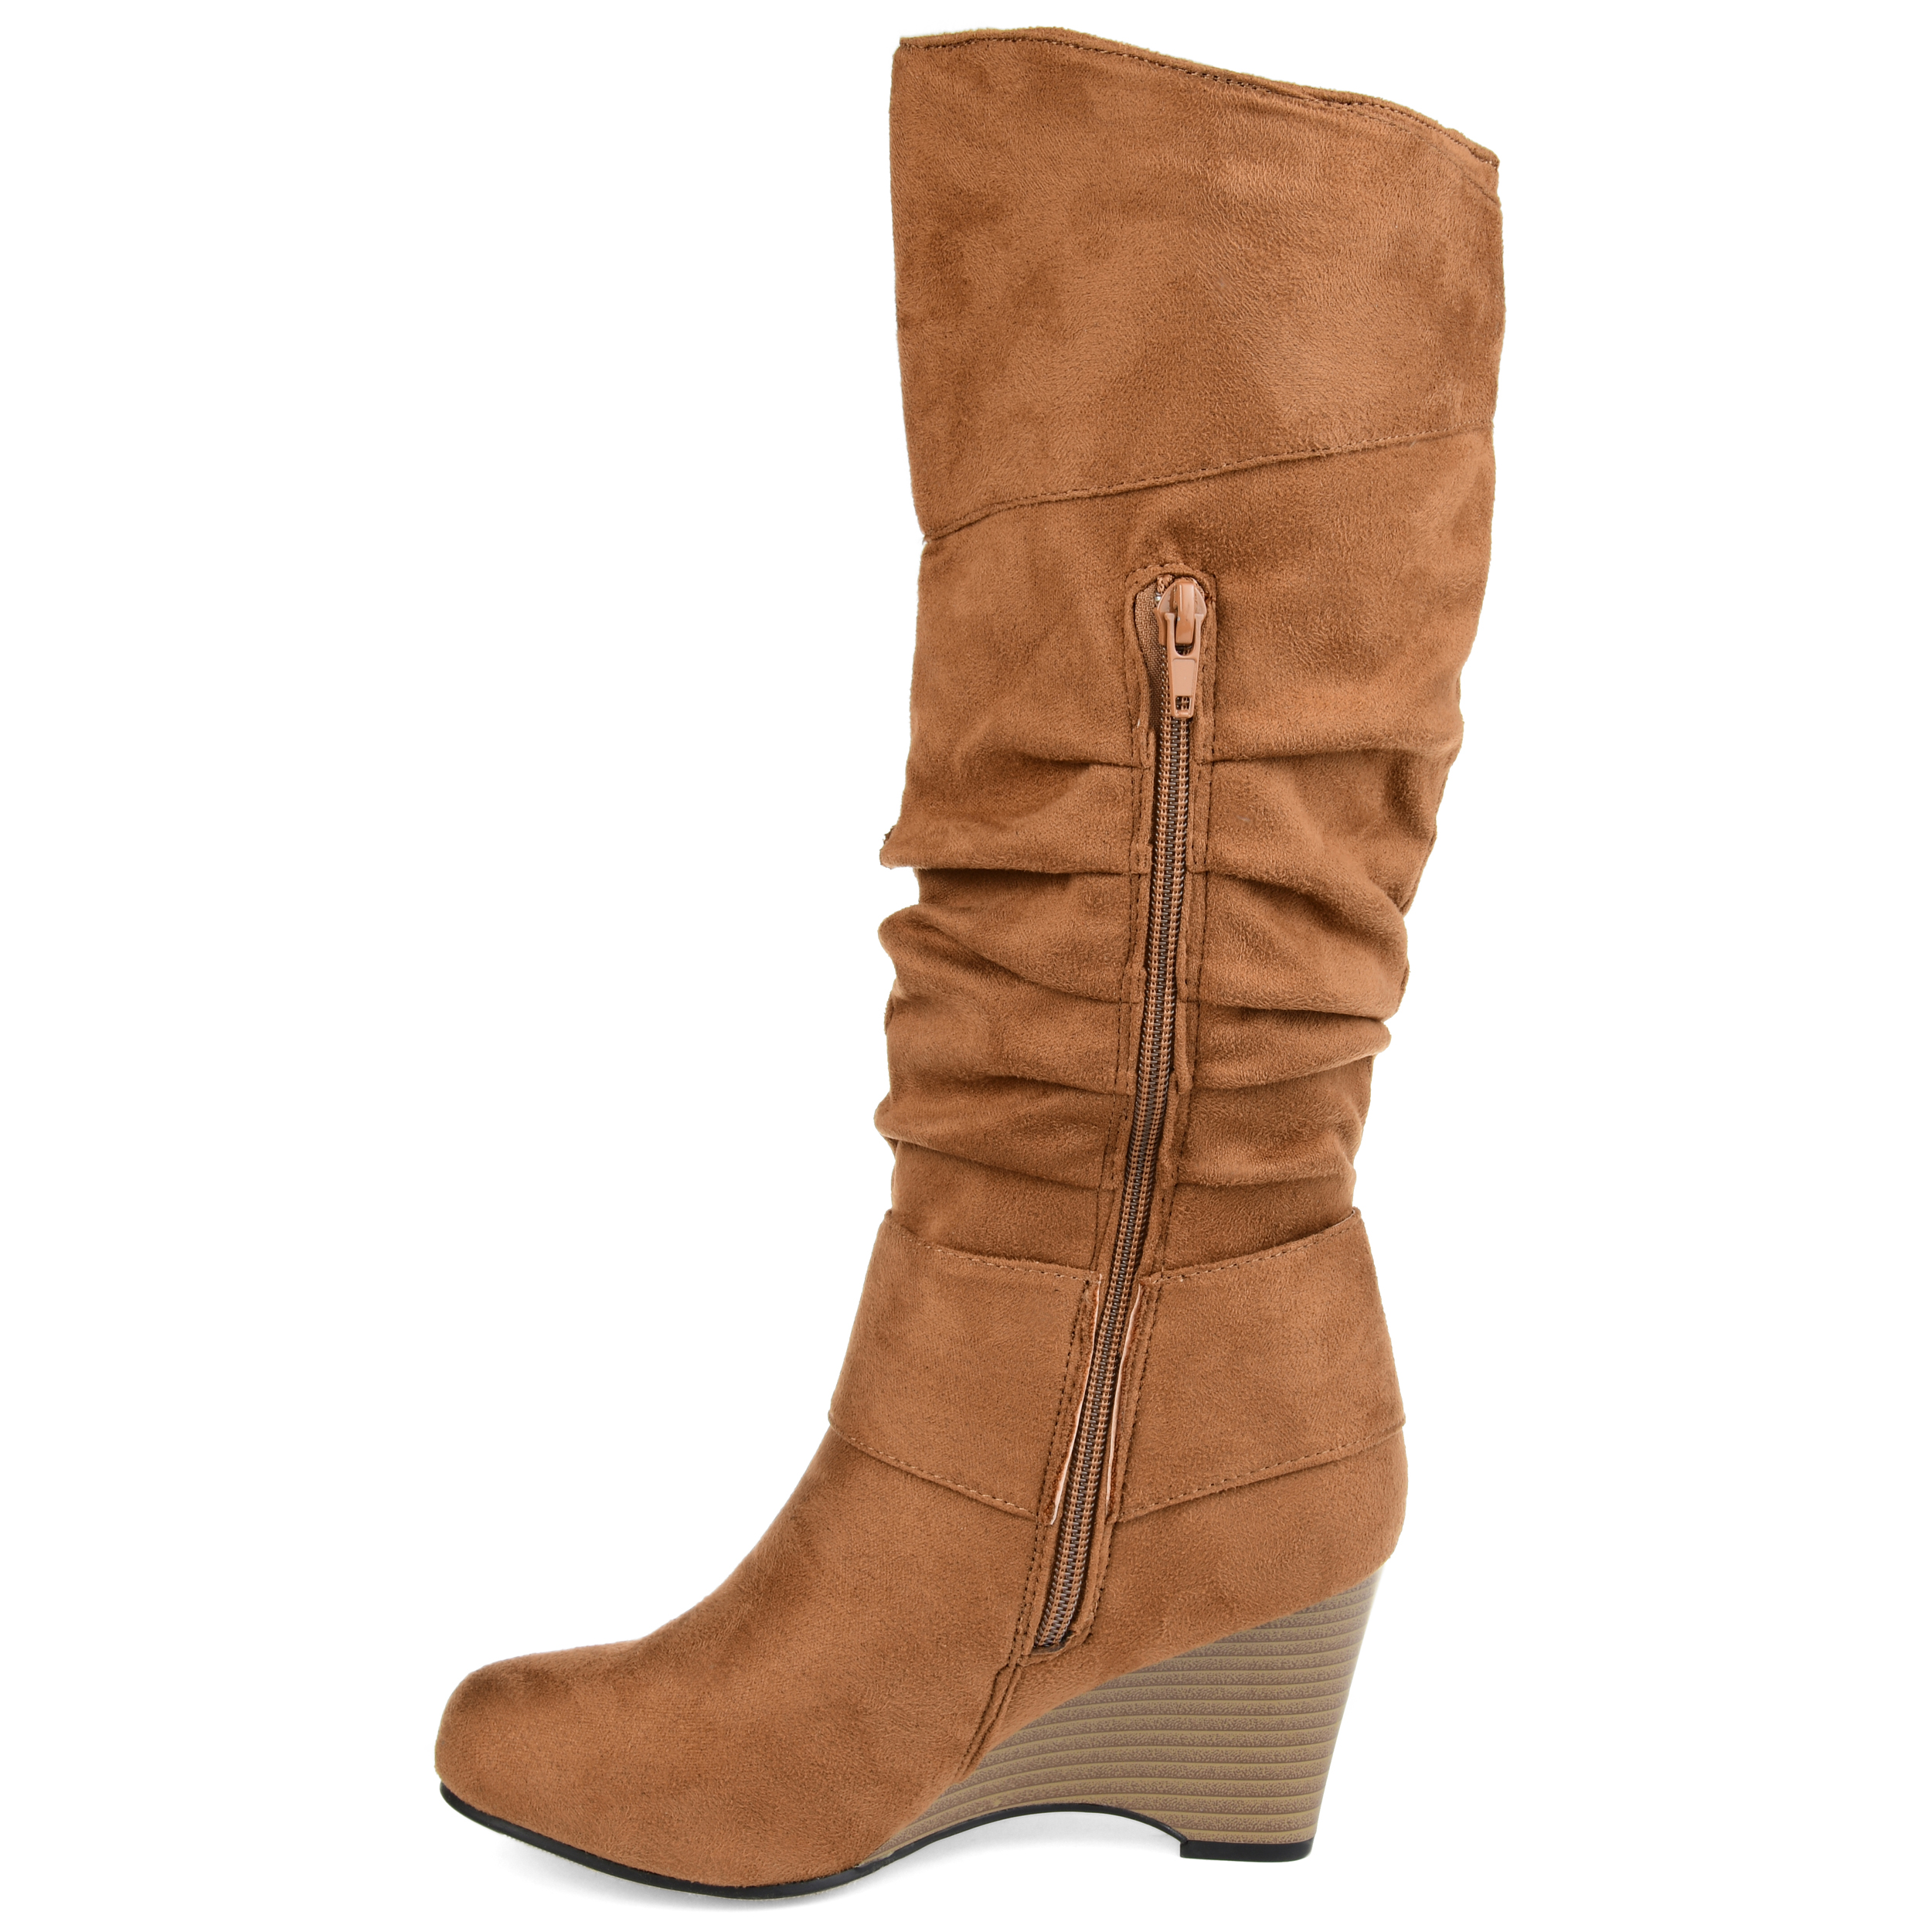 Brinley Co. Women's Faux Suede Buckle Accent Tall Boots - image 3 of 8